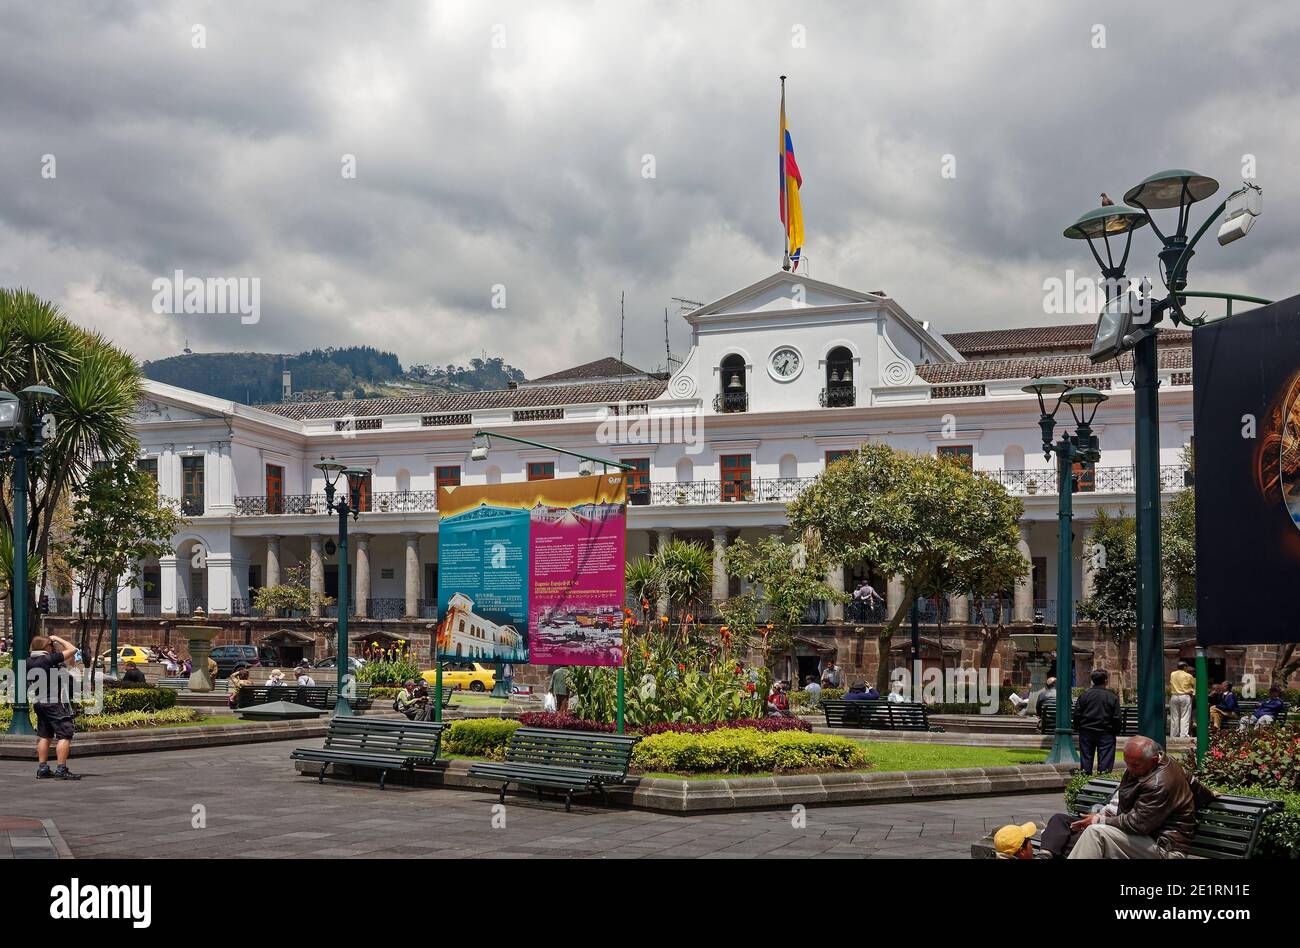 Carondelet Palace, seat of government, Independence Square, Plaza Grande, garden areas, green benches, 1790, 1801, cloudy sky, South America, Quito; E Stock Photo